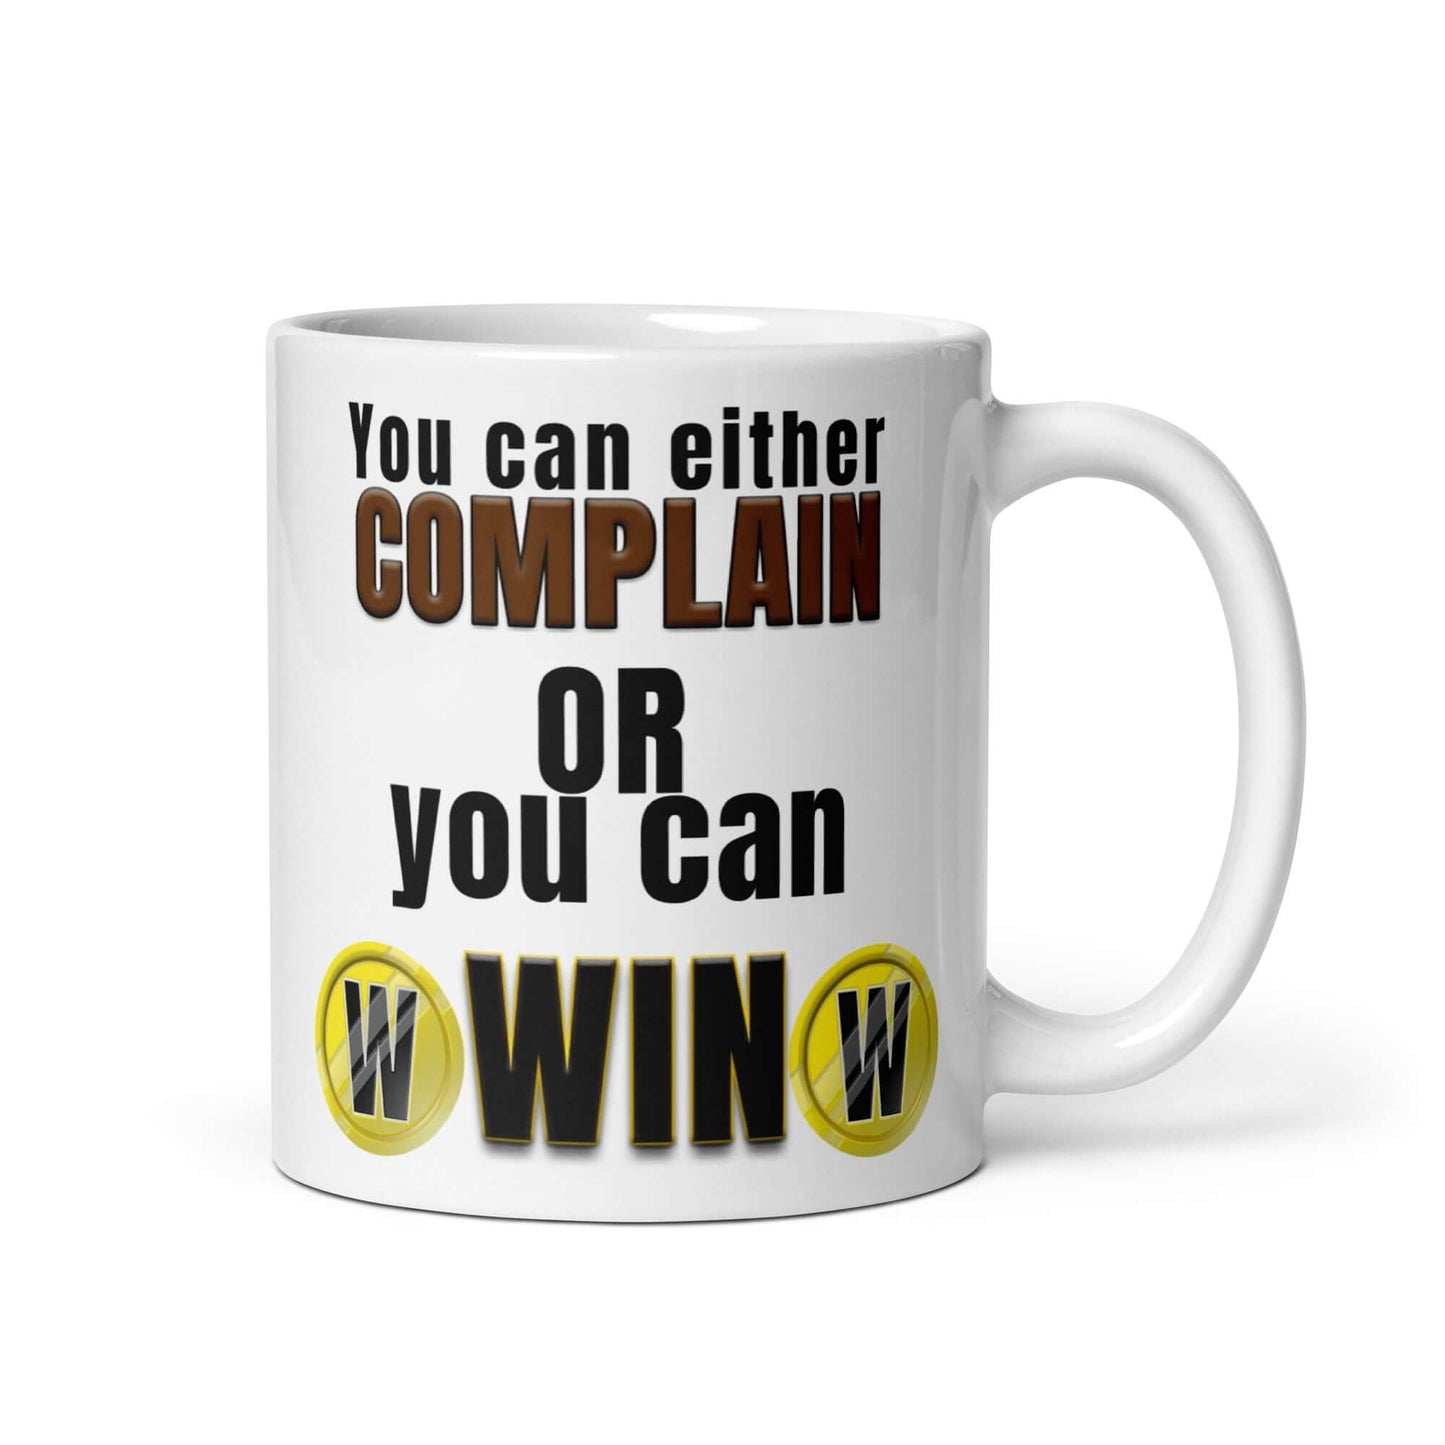 You can either complain, or you can win - White glossy mug coffee Complain friendly Politics white winner WInners Win Winning